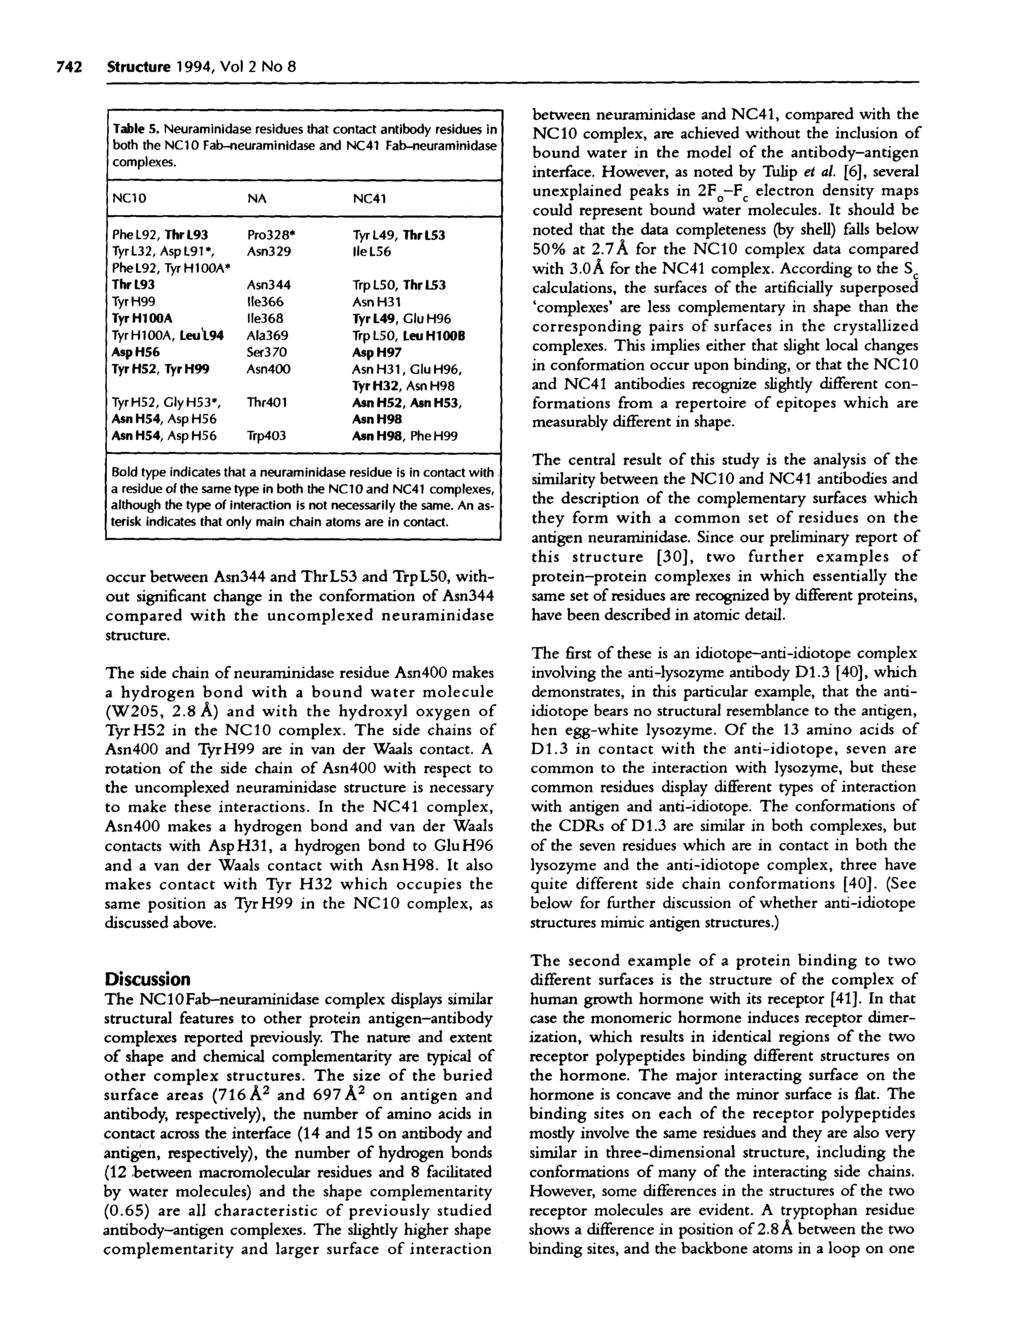 742 Structure 1994, Vol 2 No 8 Table 5. Neuraminidase residues that contact antibody residues in both the NC10 Fab-neuraminidase and NC41 Fab-neuraminidase complexes.